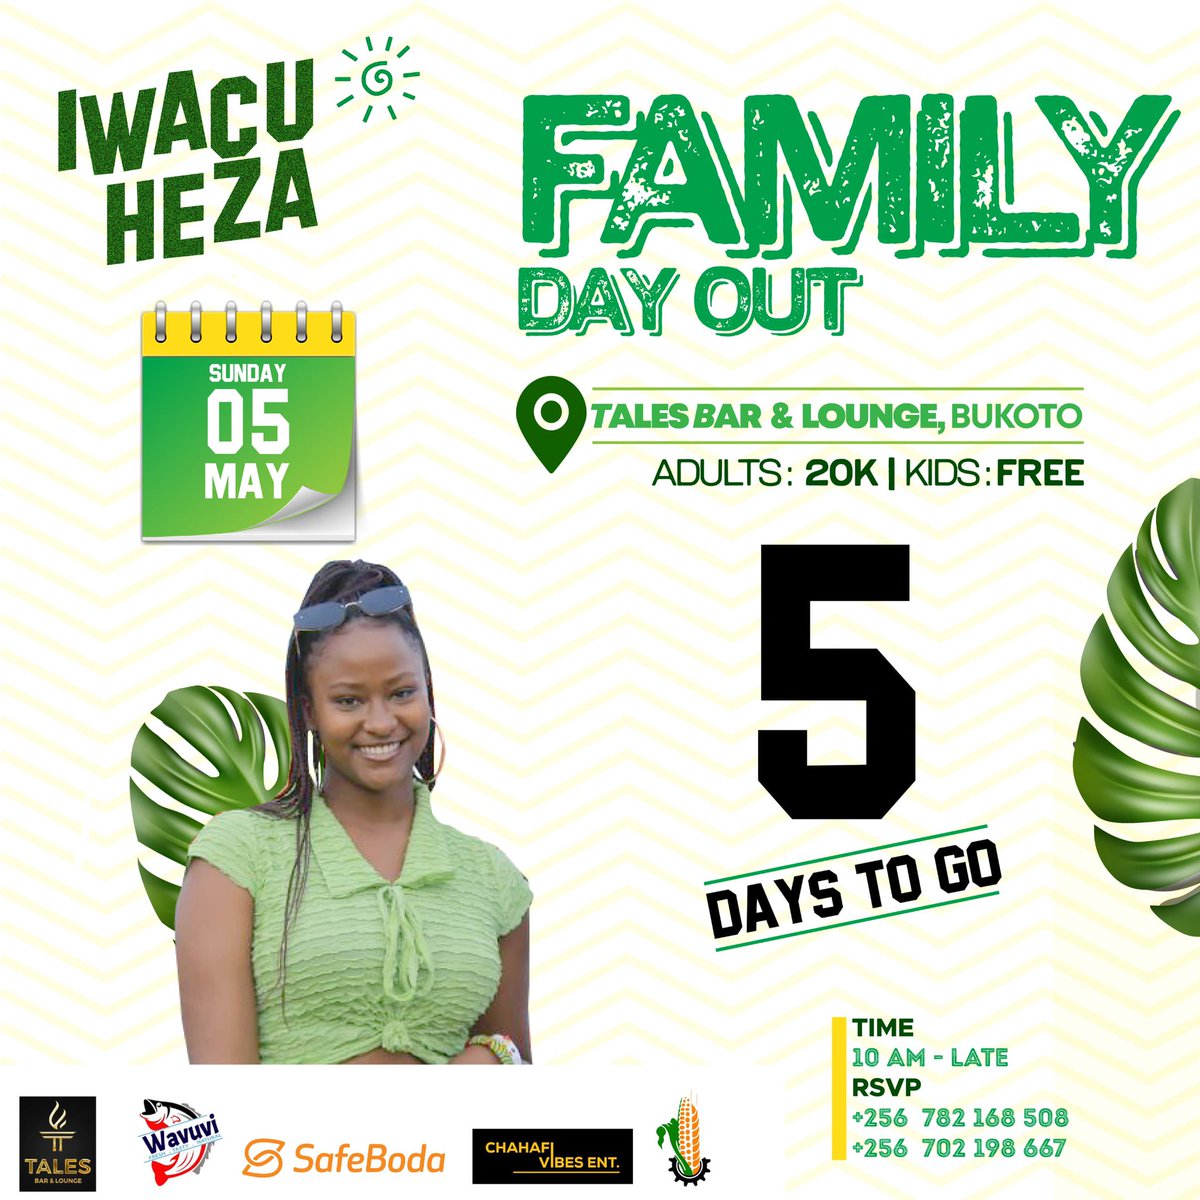 Only 5 days to go!!

Tickets to be accessible at the gate🤗
#FamilyDayOut 
#IwacuHeza